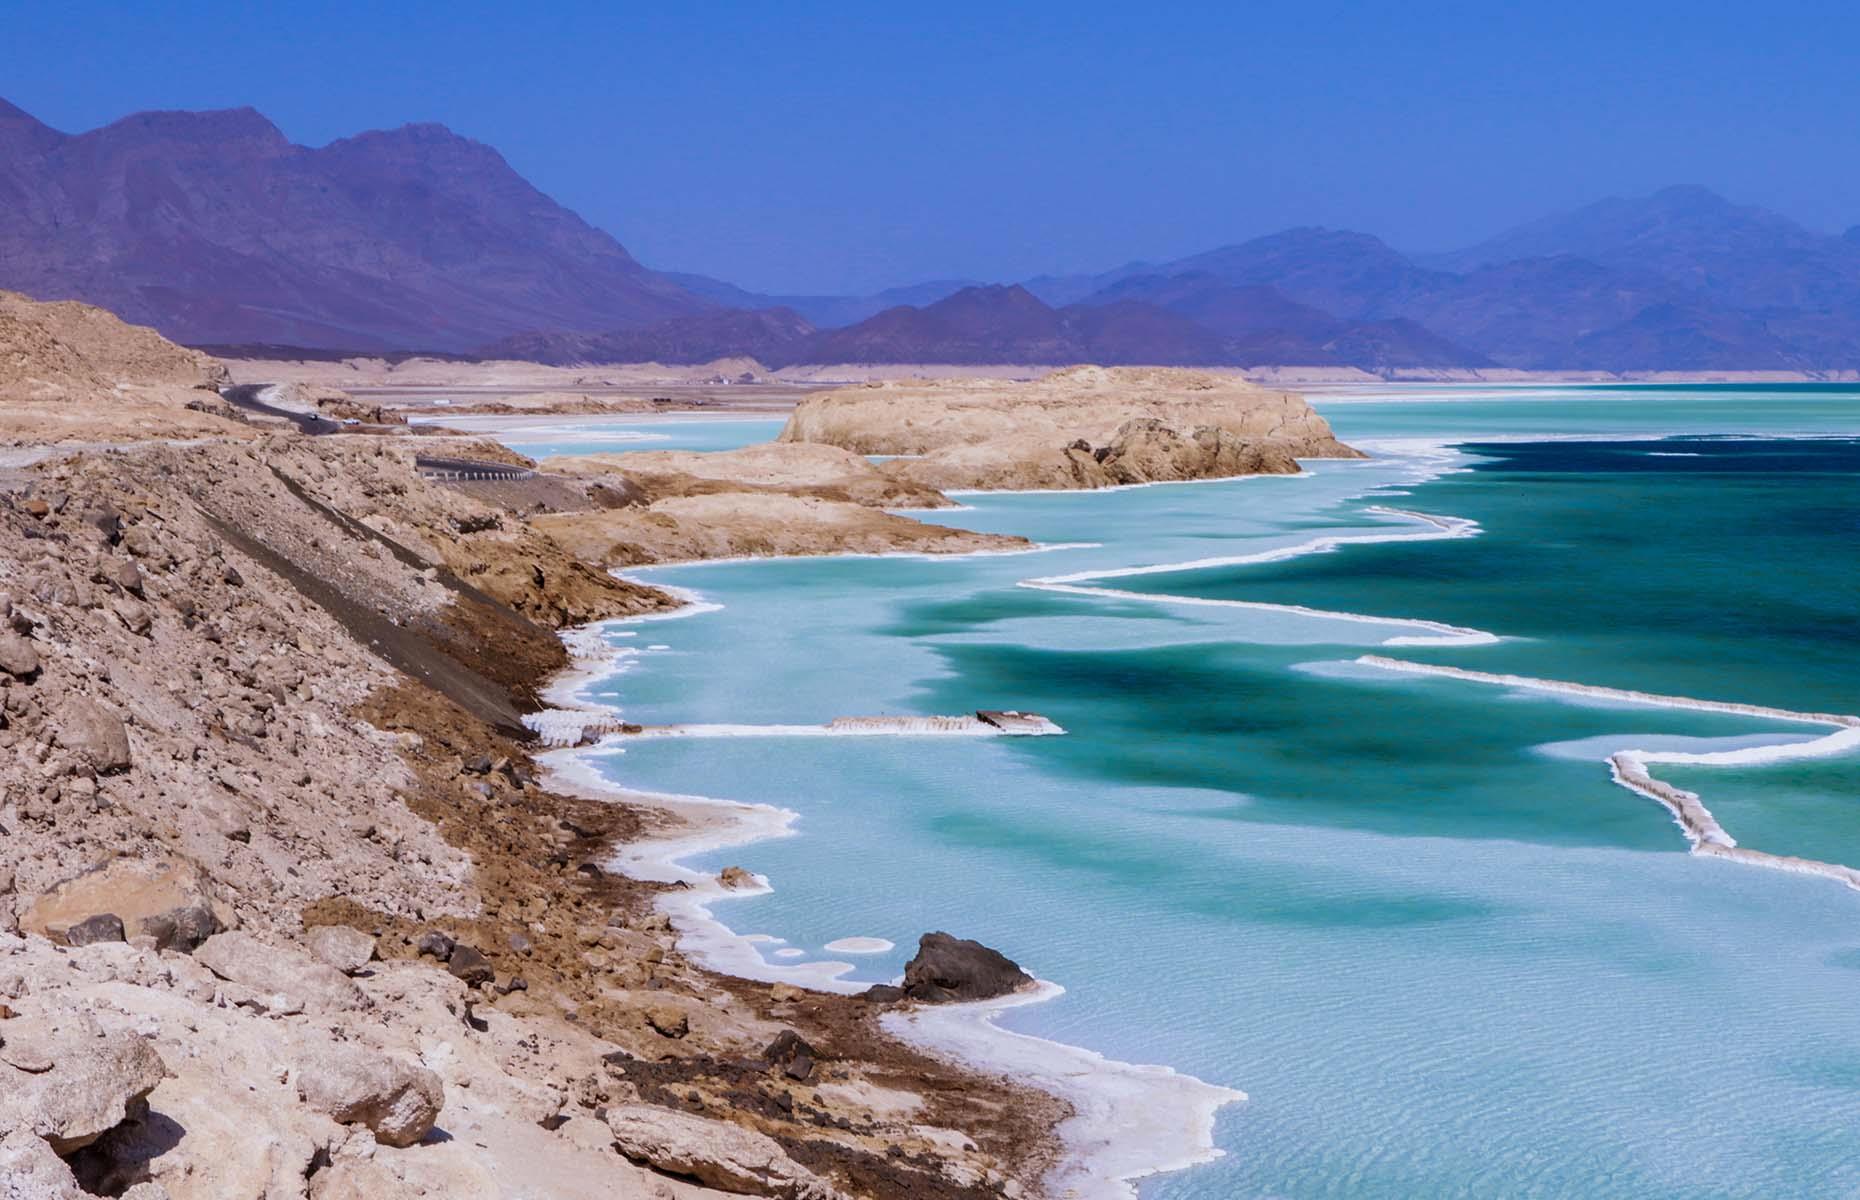 <p>French colonialists established Djibouti City in 1888, and it’s now a vibrant, multicultural capital that showcases the country’s mix of African, Arabic and Asian influences. But it’s Djibouti’s landscapes that really stand out, including salt-rich Lac Assal (pictured), the lowest point in Africa and surrounded by the looming shadows of volcanoes; and the other-worldly plains of Lac Abbe. Travel advisories suggest steering clear of the border area with Eritrea and remaining vigilant against the threats of crime and terrorism when travelling around Djibouti.</p>